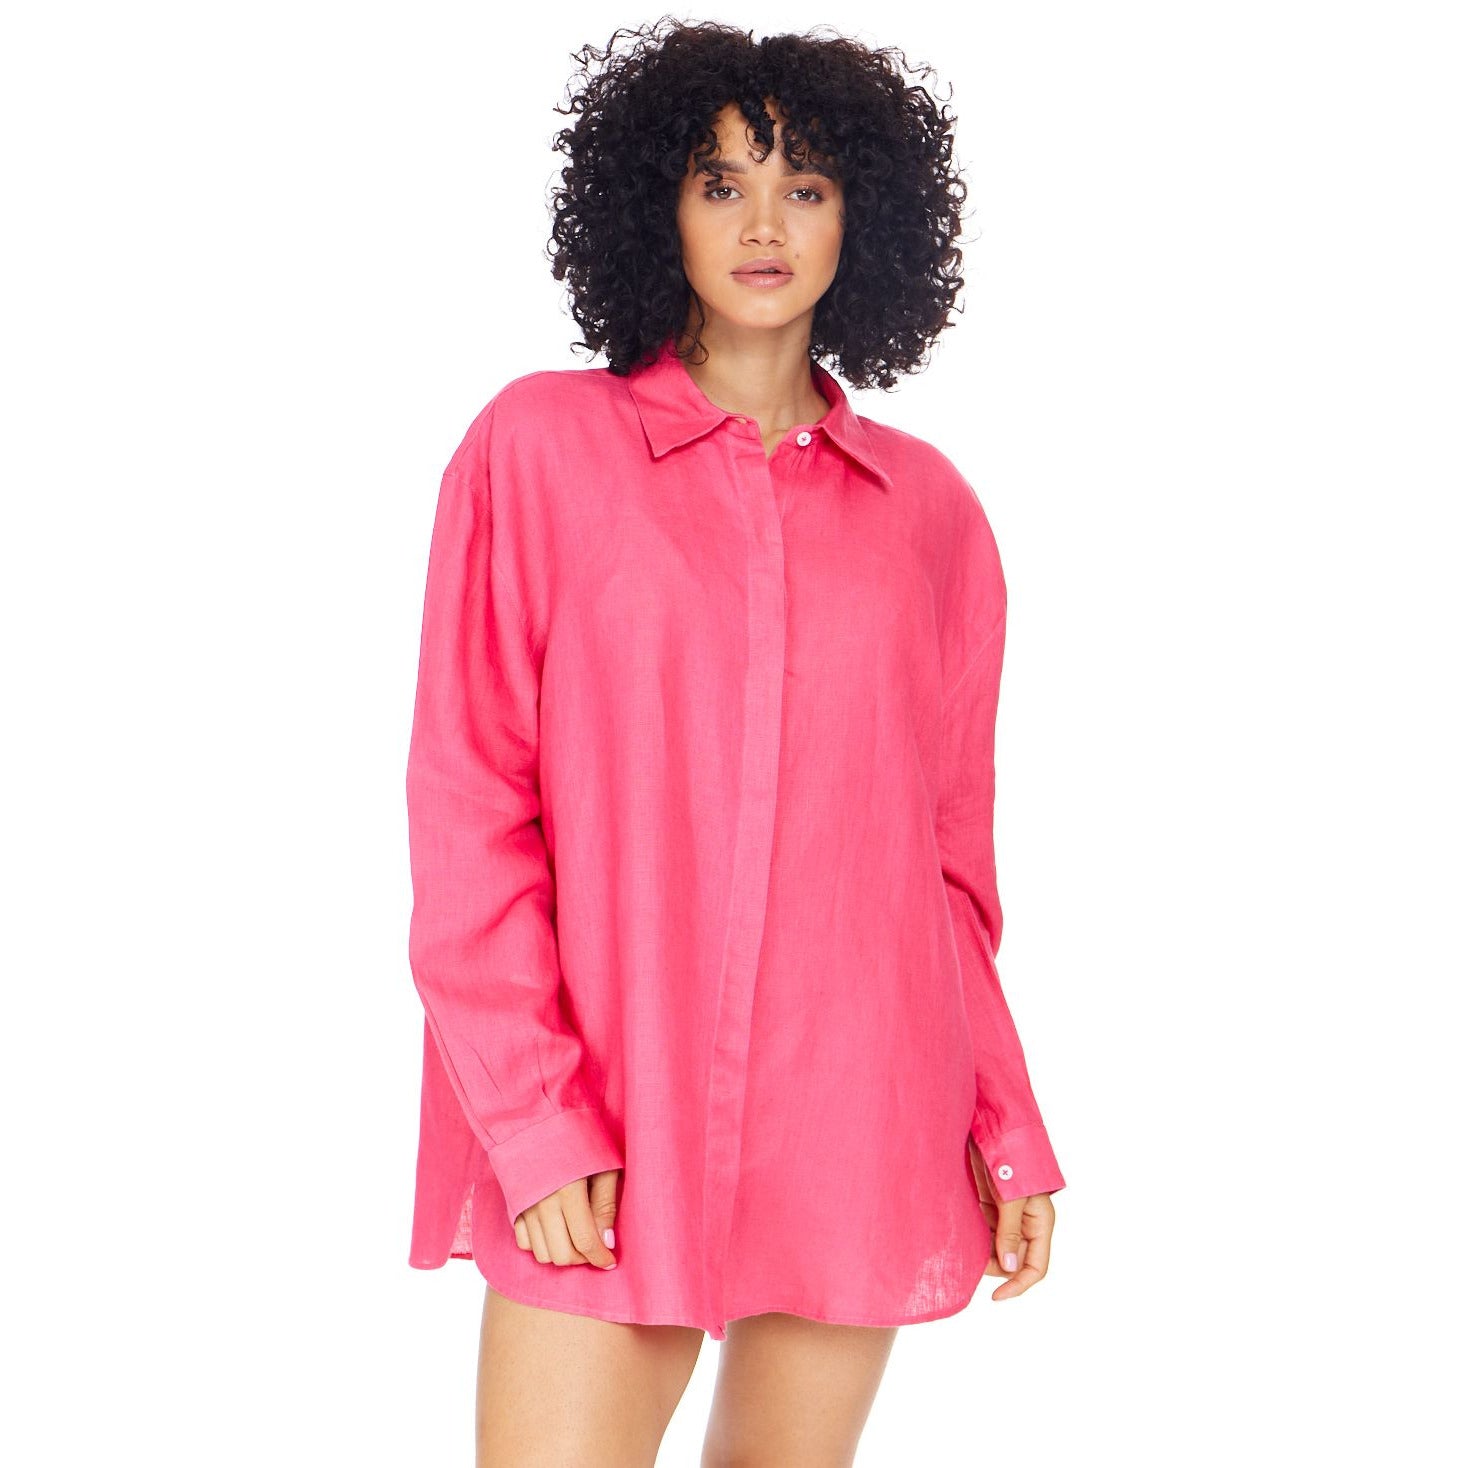 Blouse | Venice Roze - For Models and Mermaids